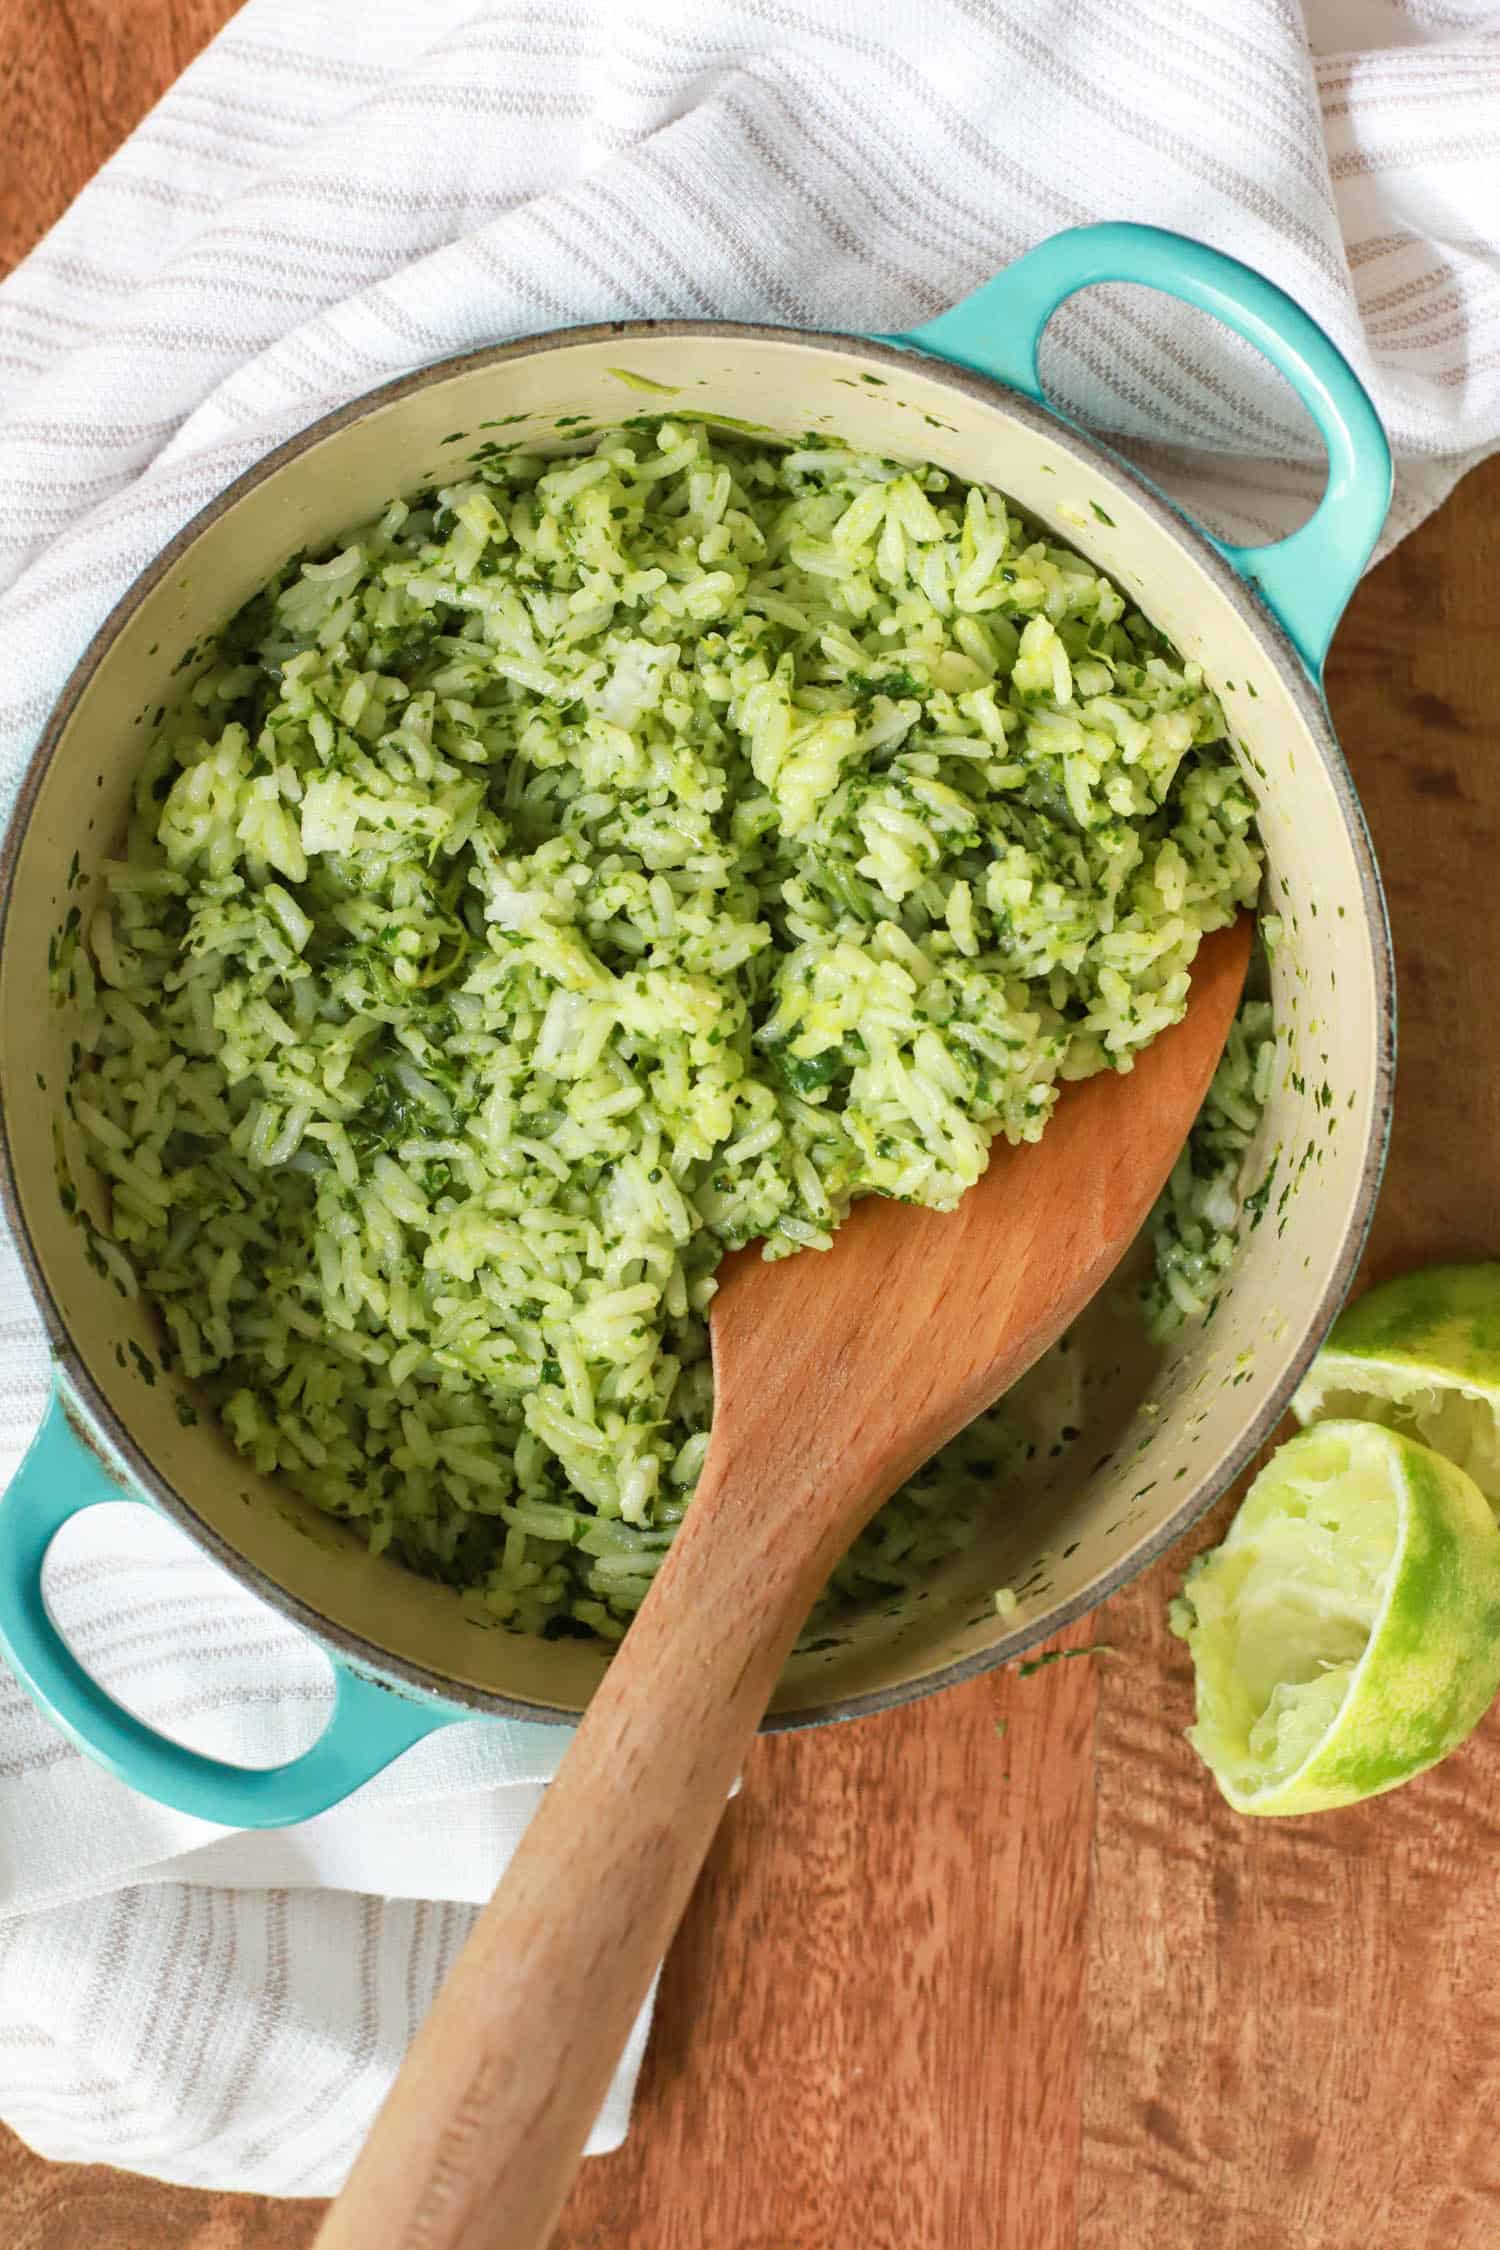 Small blue pot of Mexican green rice with wooden rice paddle.